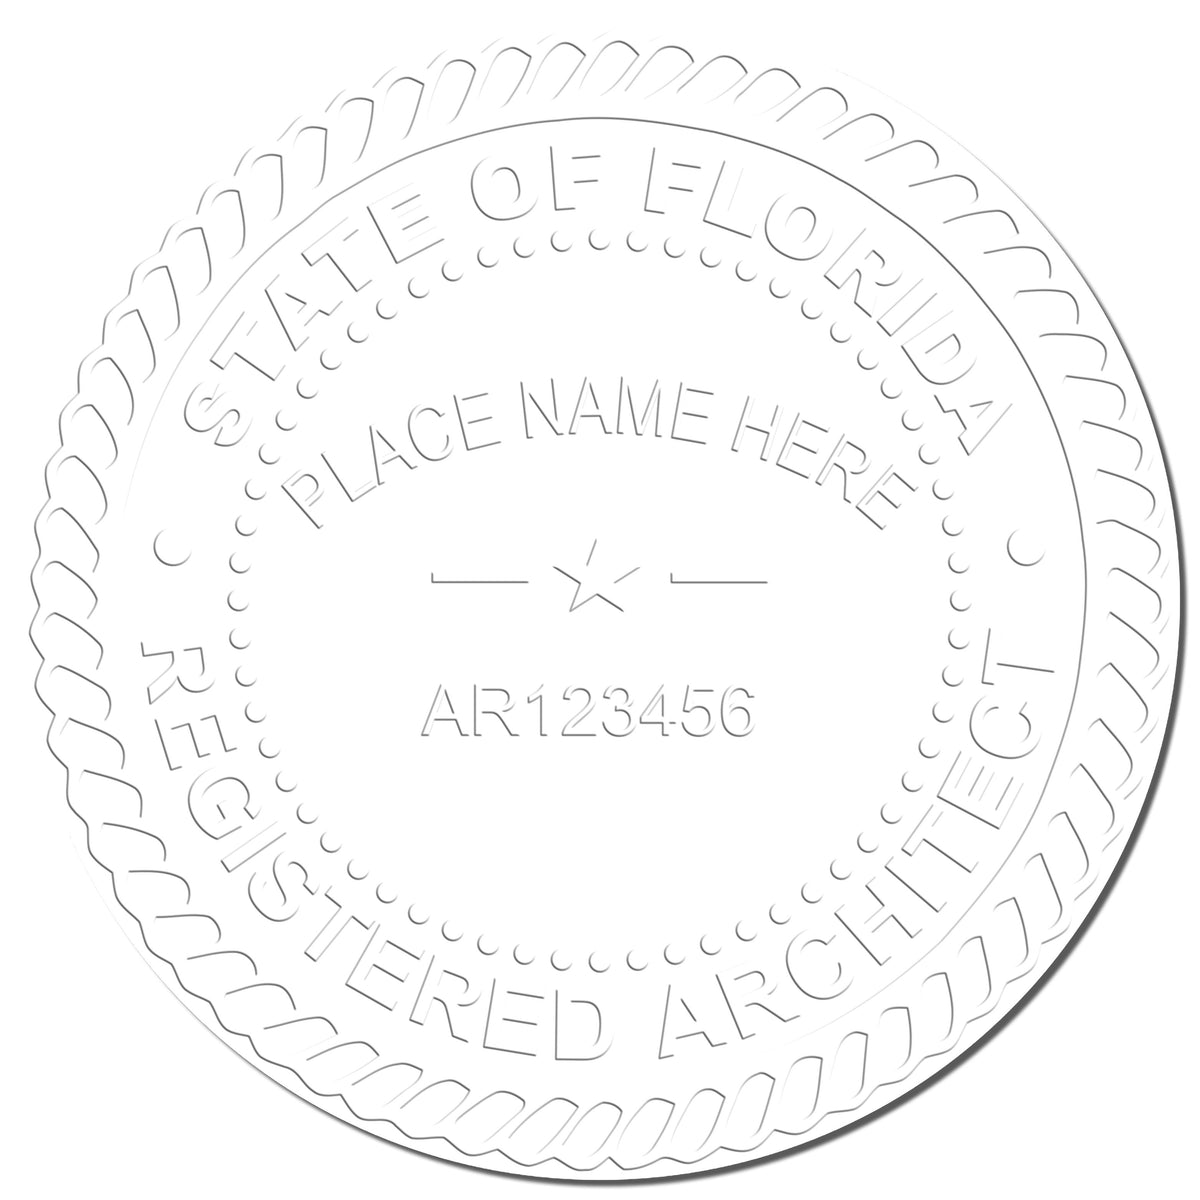 This paper is stamped with a sample imprint of the Gift Florida Architect Seal, signifying its quality and reliability.